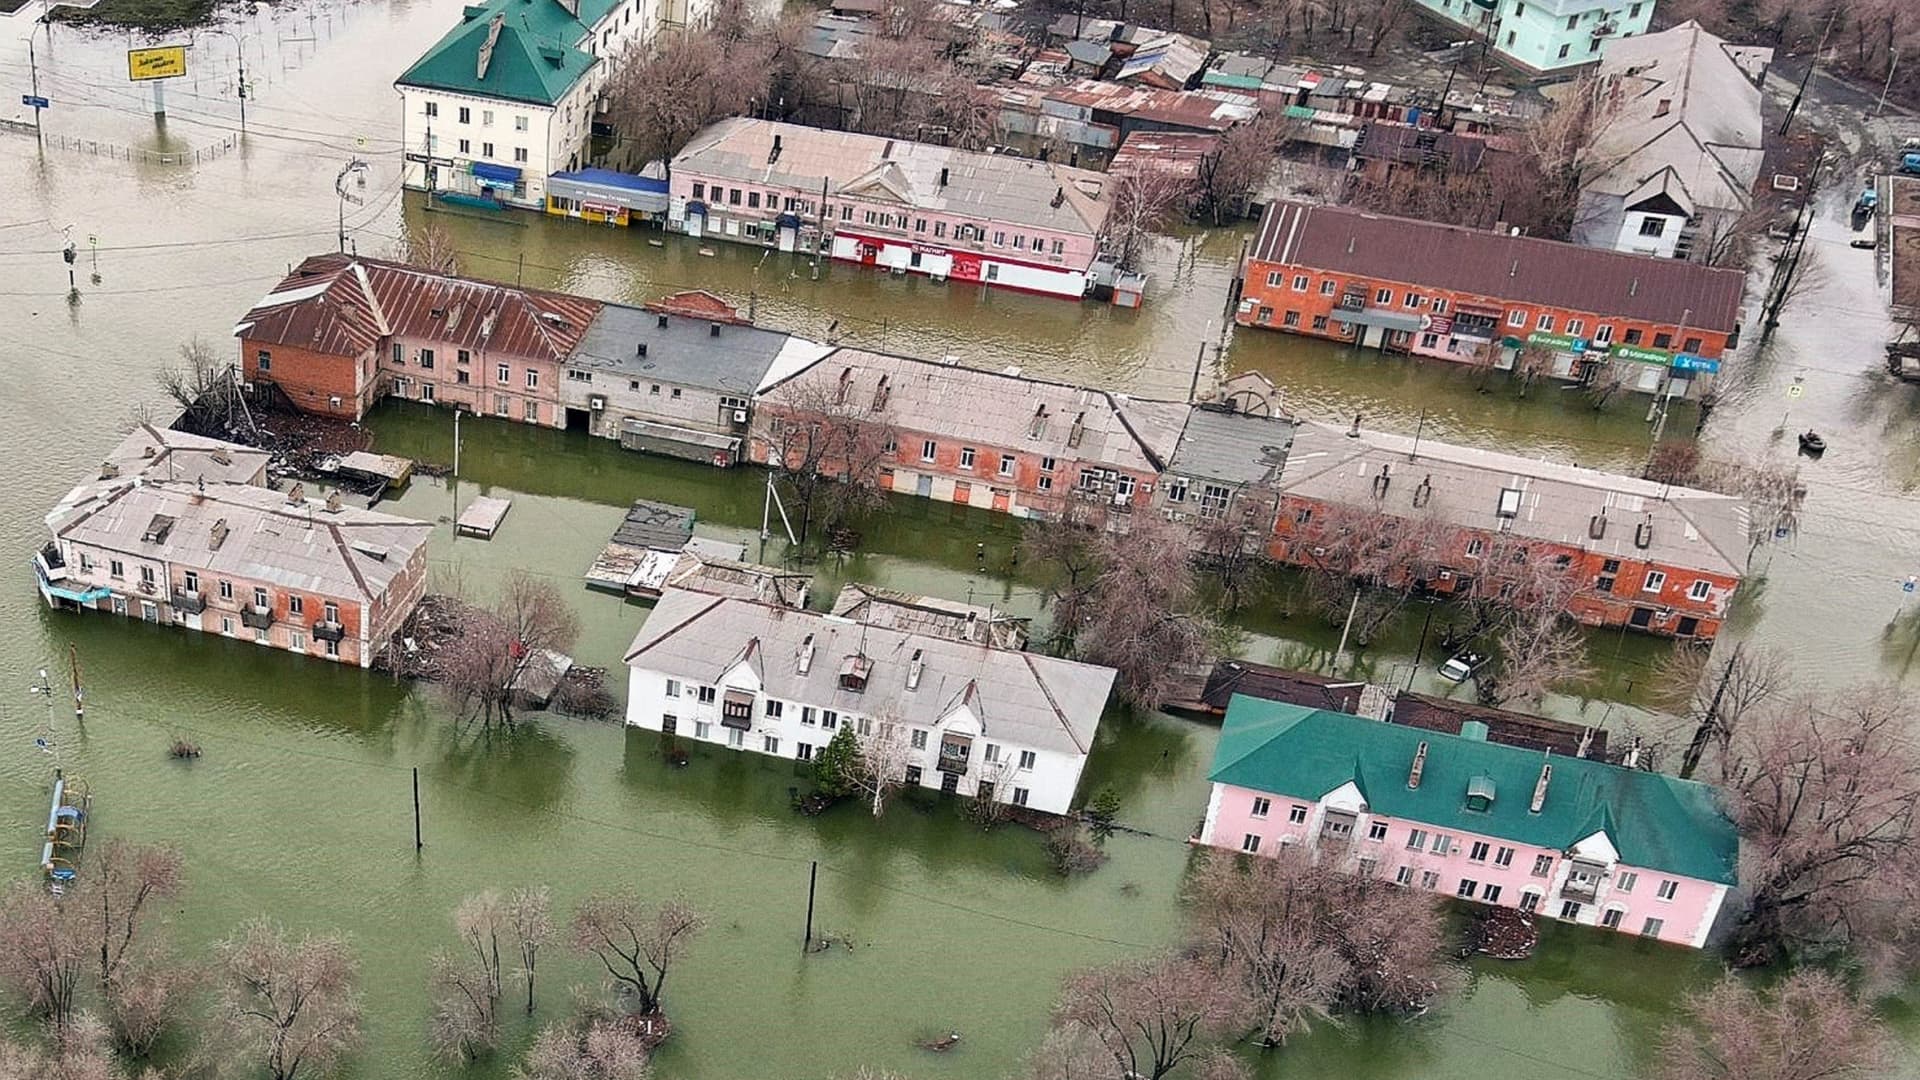 An aerial picture taken on April 8, 2024 shows the flooded part of the city of Orsk, Russia's Orenburg region, southeast of the southern tip of the Ural Mountains. Russia said on April 8, 2024 that more than 10,000 residential buildings were flooded across the Urals, Volga area and western Siberia as emergency services evacuated cities threatened by rising rivers. On April 7, Russia declared a federal emergency in the Orenburg region, where the Ural river flooded much of the city of Orsk and is now reaching dangerous levels in the main city of Orenburg. Much of the city of Orsk has been flooded after torrential rain burst a nearby dam. (Photo by Anatoliy Zhdanov / Kommersant Photo / AFP) / Russia OUT (Photo by ANATOLIY ZHDANOV/Kommersant Photo/AFP via Getty Images)